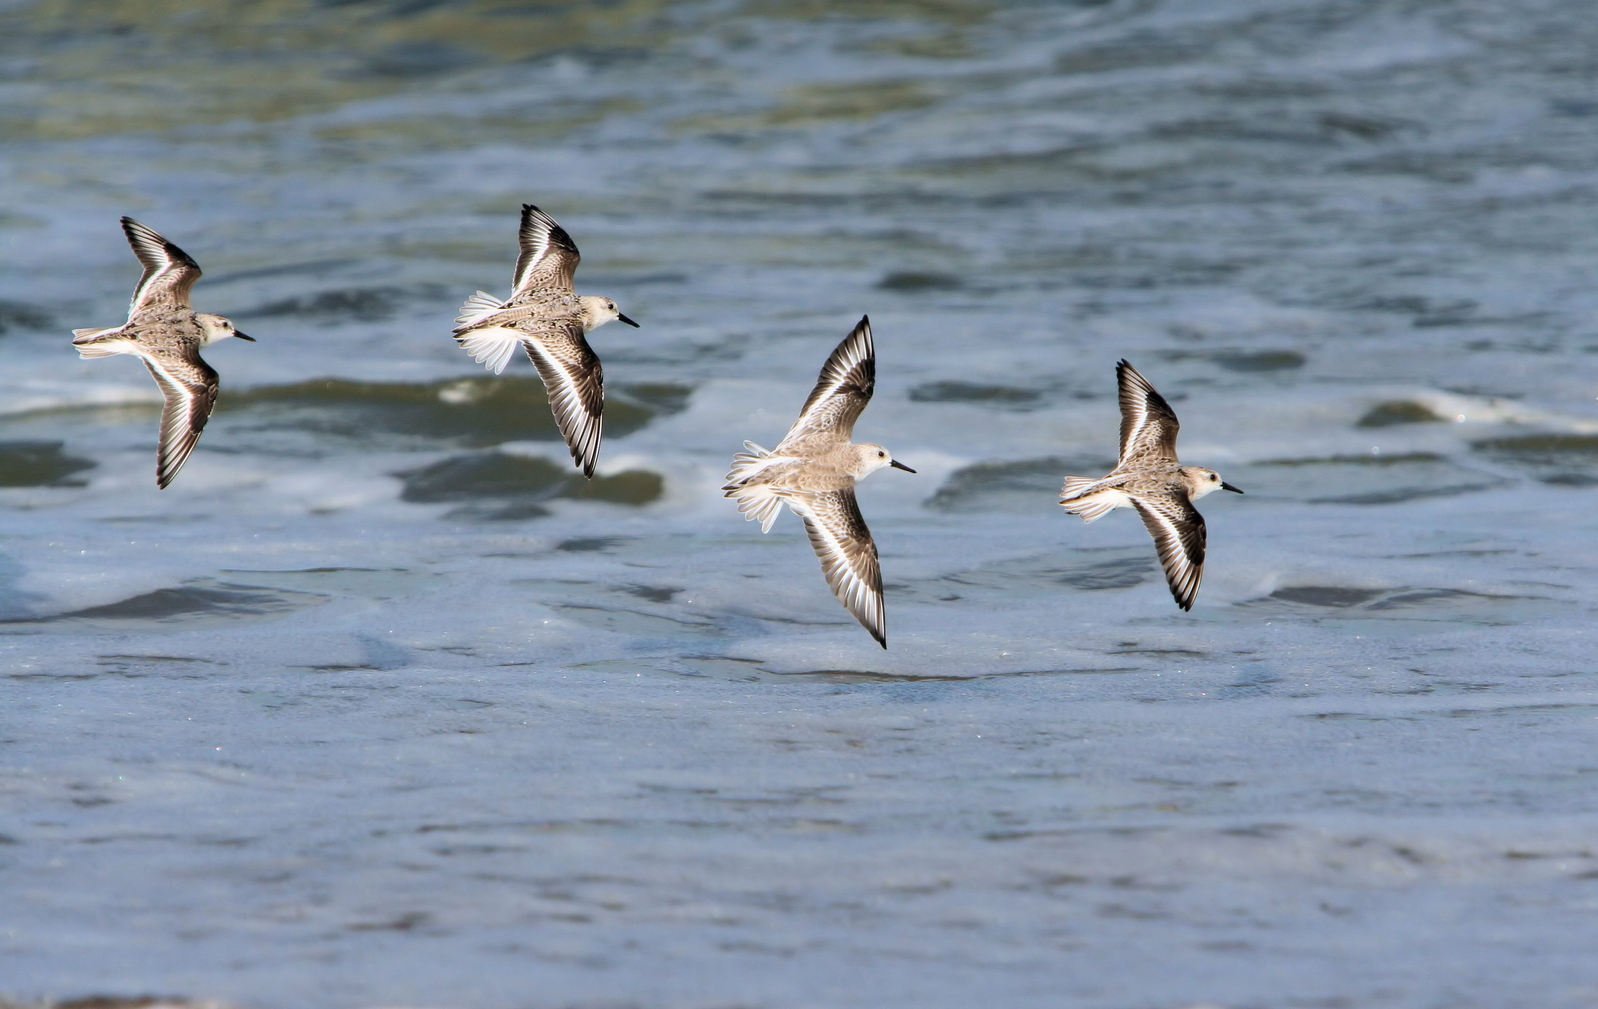 four birds flying over the ocean water and having trouble in flight